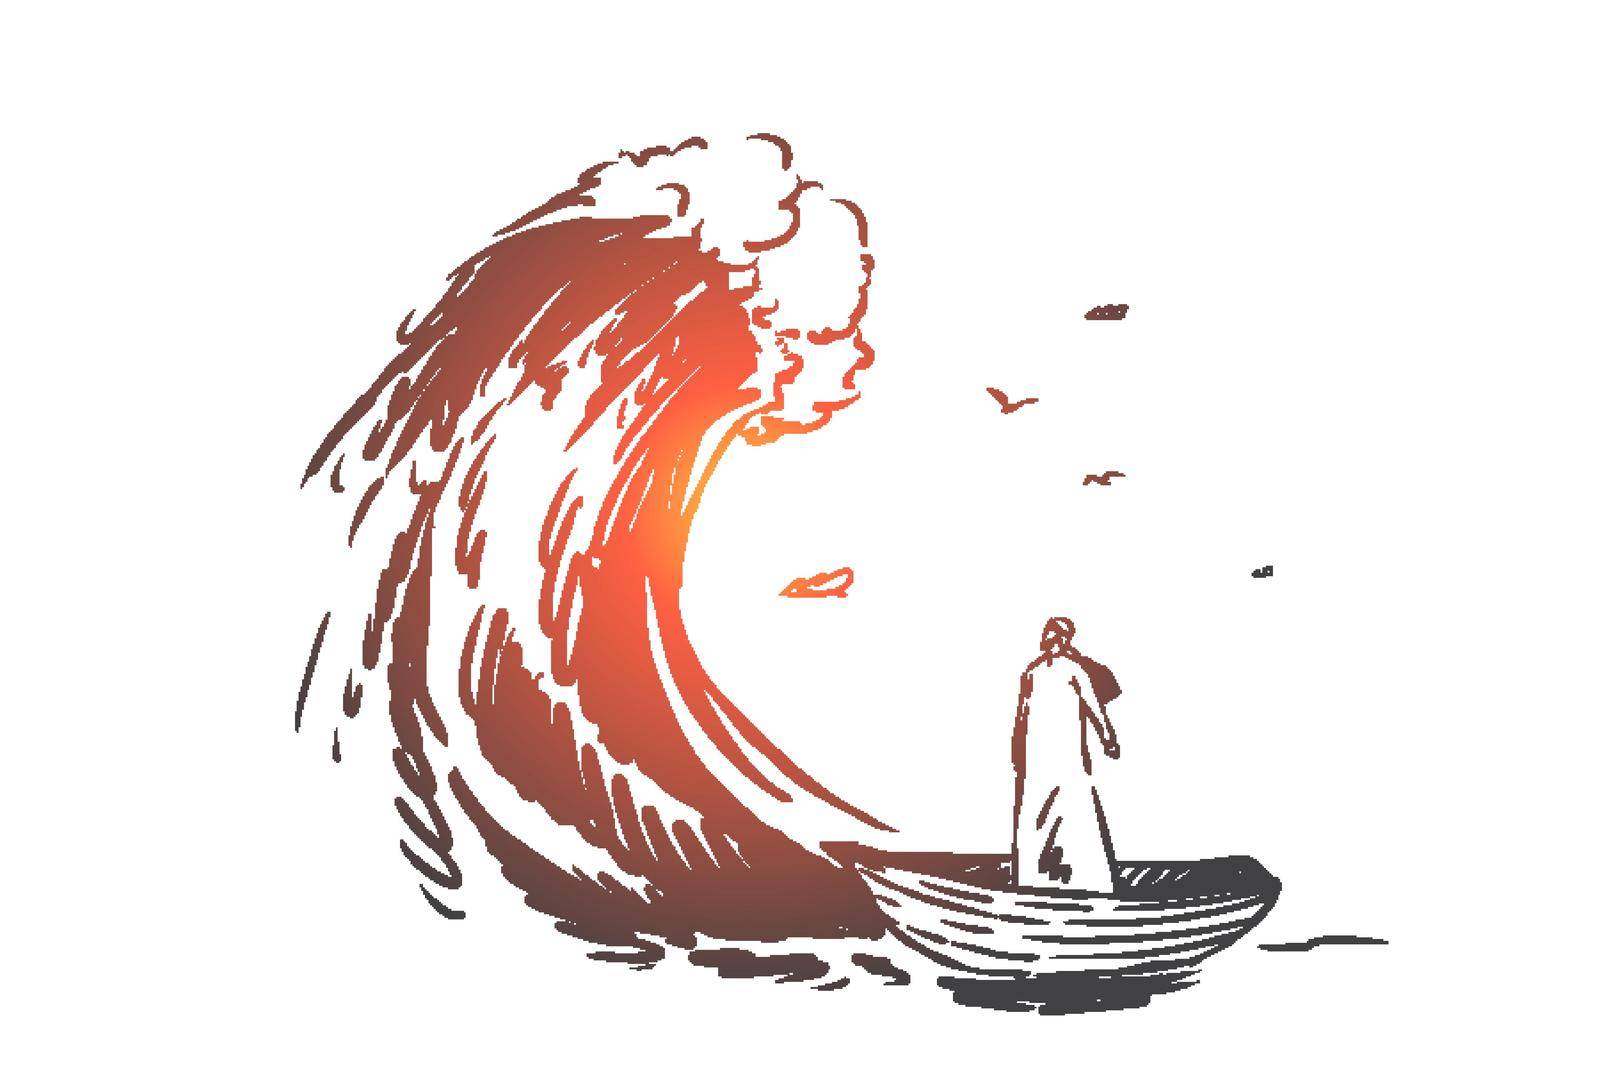 Risk, danger, crisis, bankruptcy concept sketch. Man from Saudi Arabia standing on boat and looking at huge wave ahead. Hand drawn isolated vector illustration